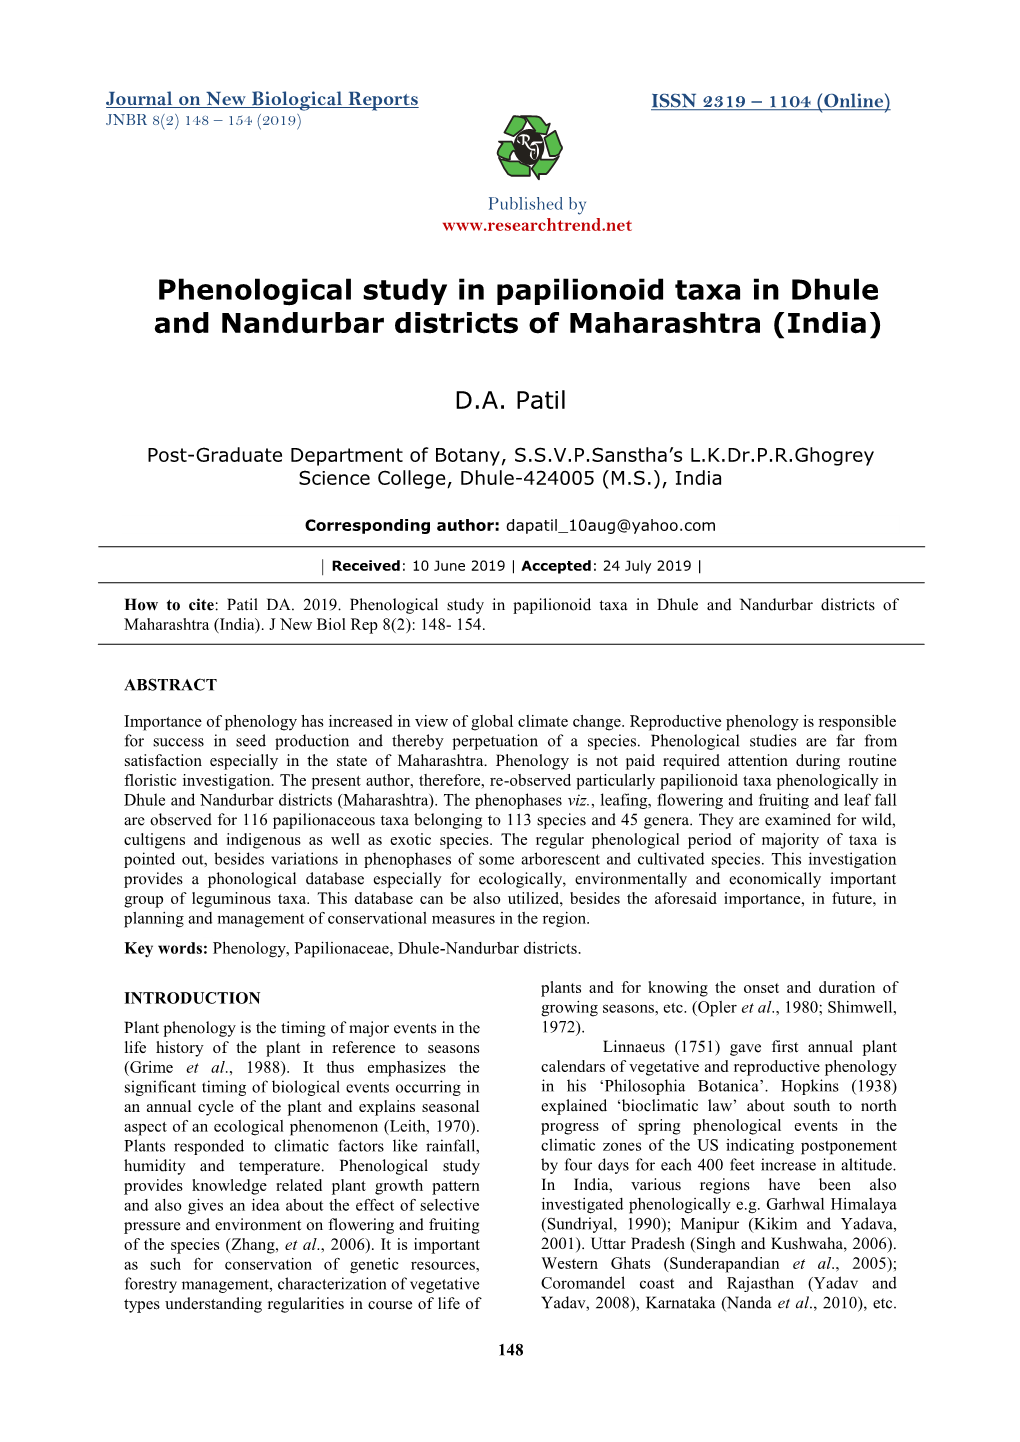 Phenological Study in Papilionoid Taxa in Dhule and Nandurbar Districts of Maharashtra (India)